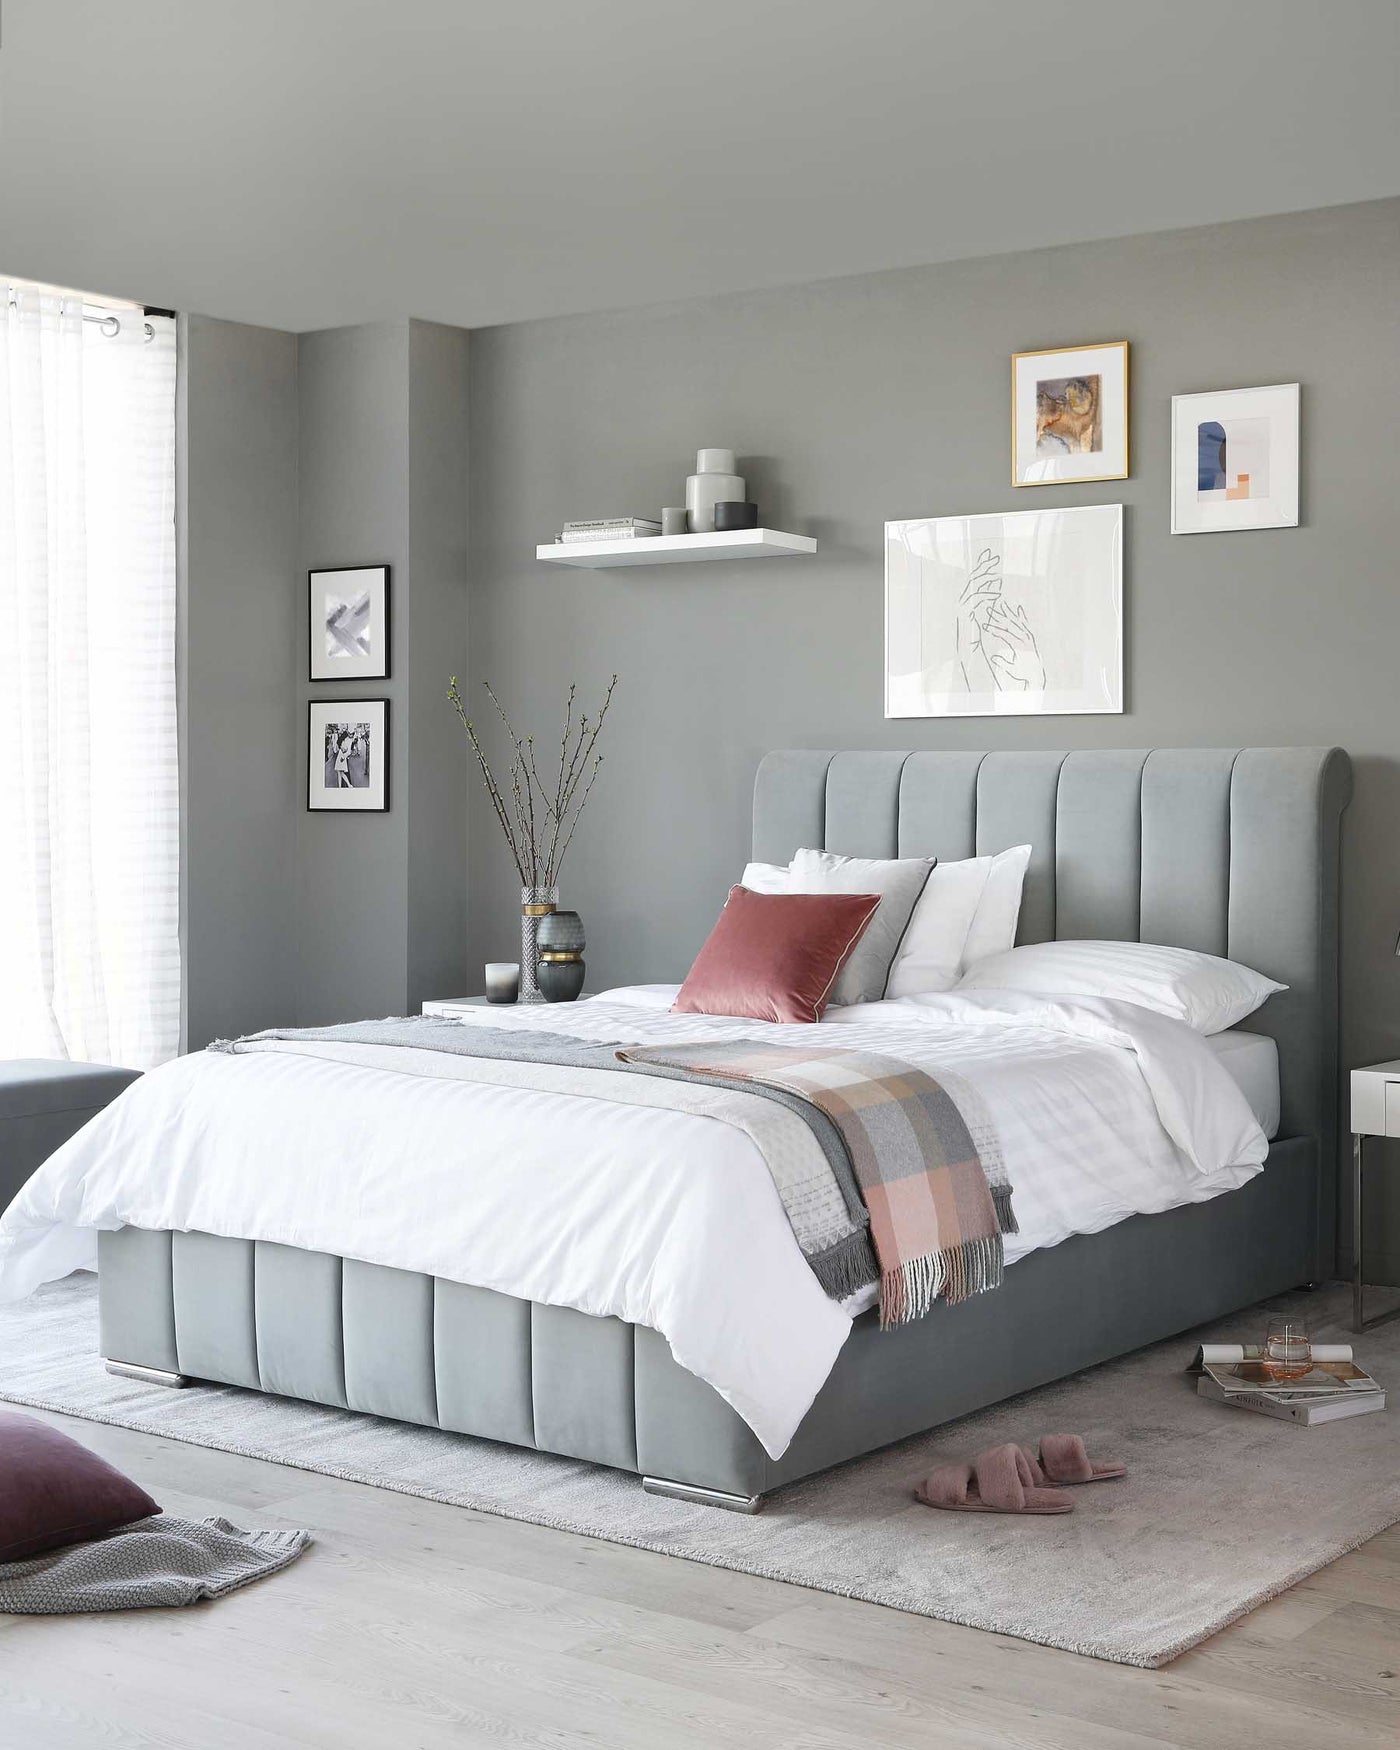 Contemporary styled bedroom featuring a plush upholstered bed with a high, vertical tufted headboard, flanked by two sleek white bedside tables with minimalistic designs. A floating white shelf is mounted above the bed for additional decor.